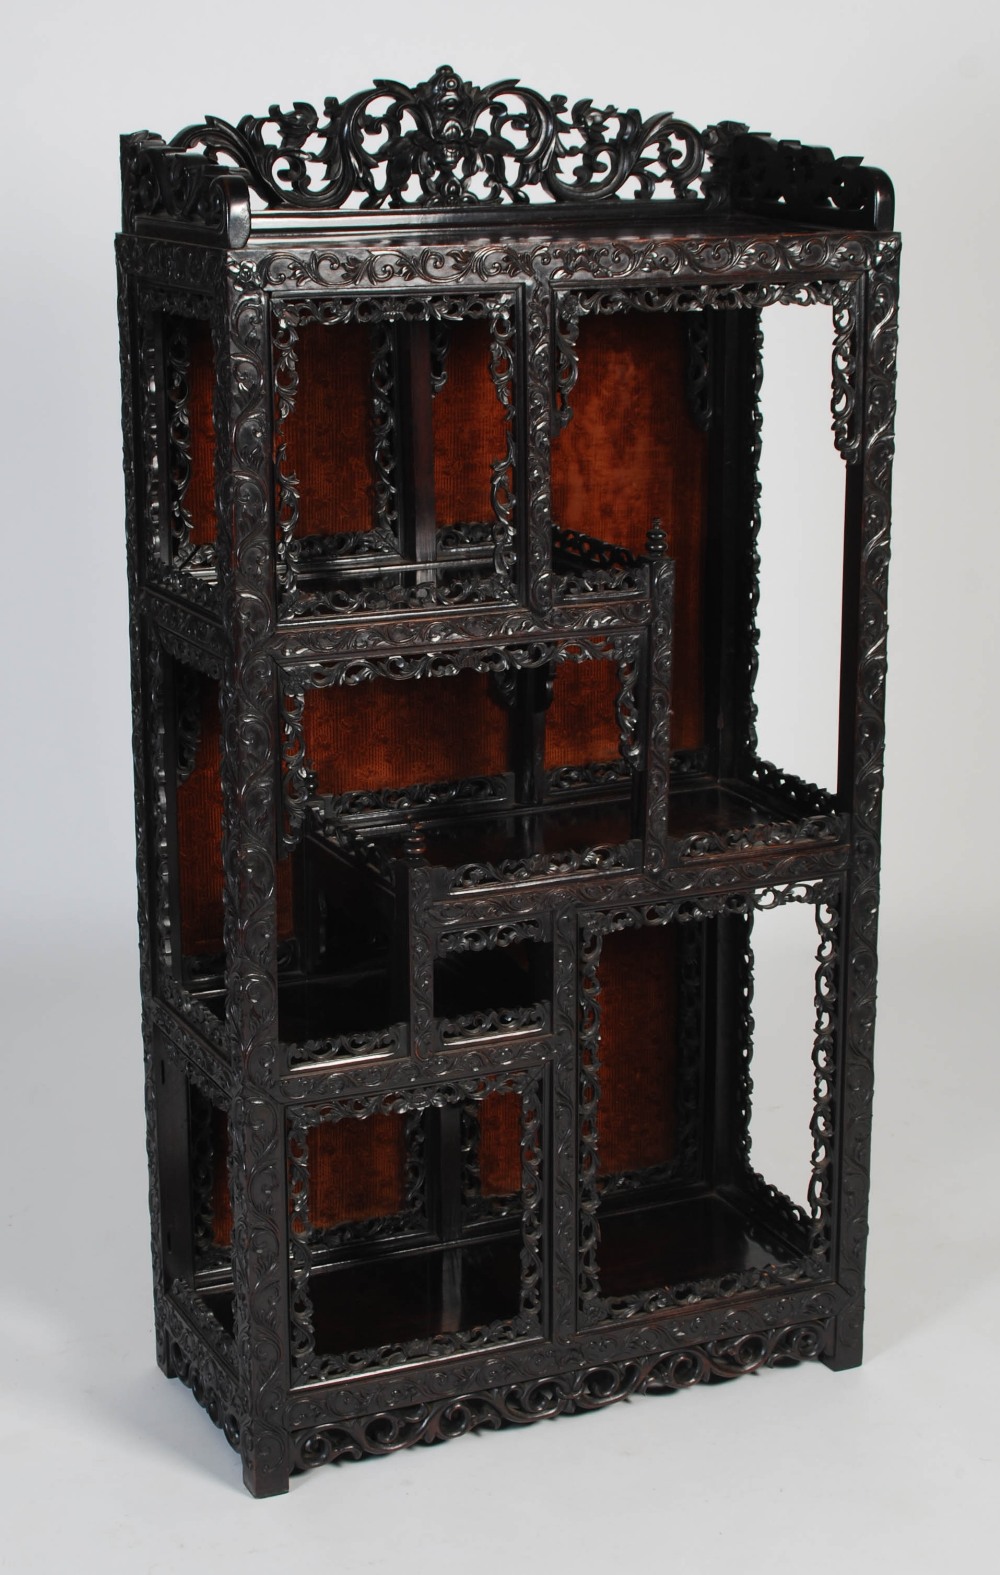 A Chinese darkwood display cabinet, late 19th/ early 20th century, the rectangular top with